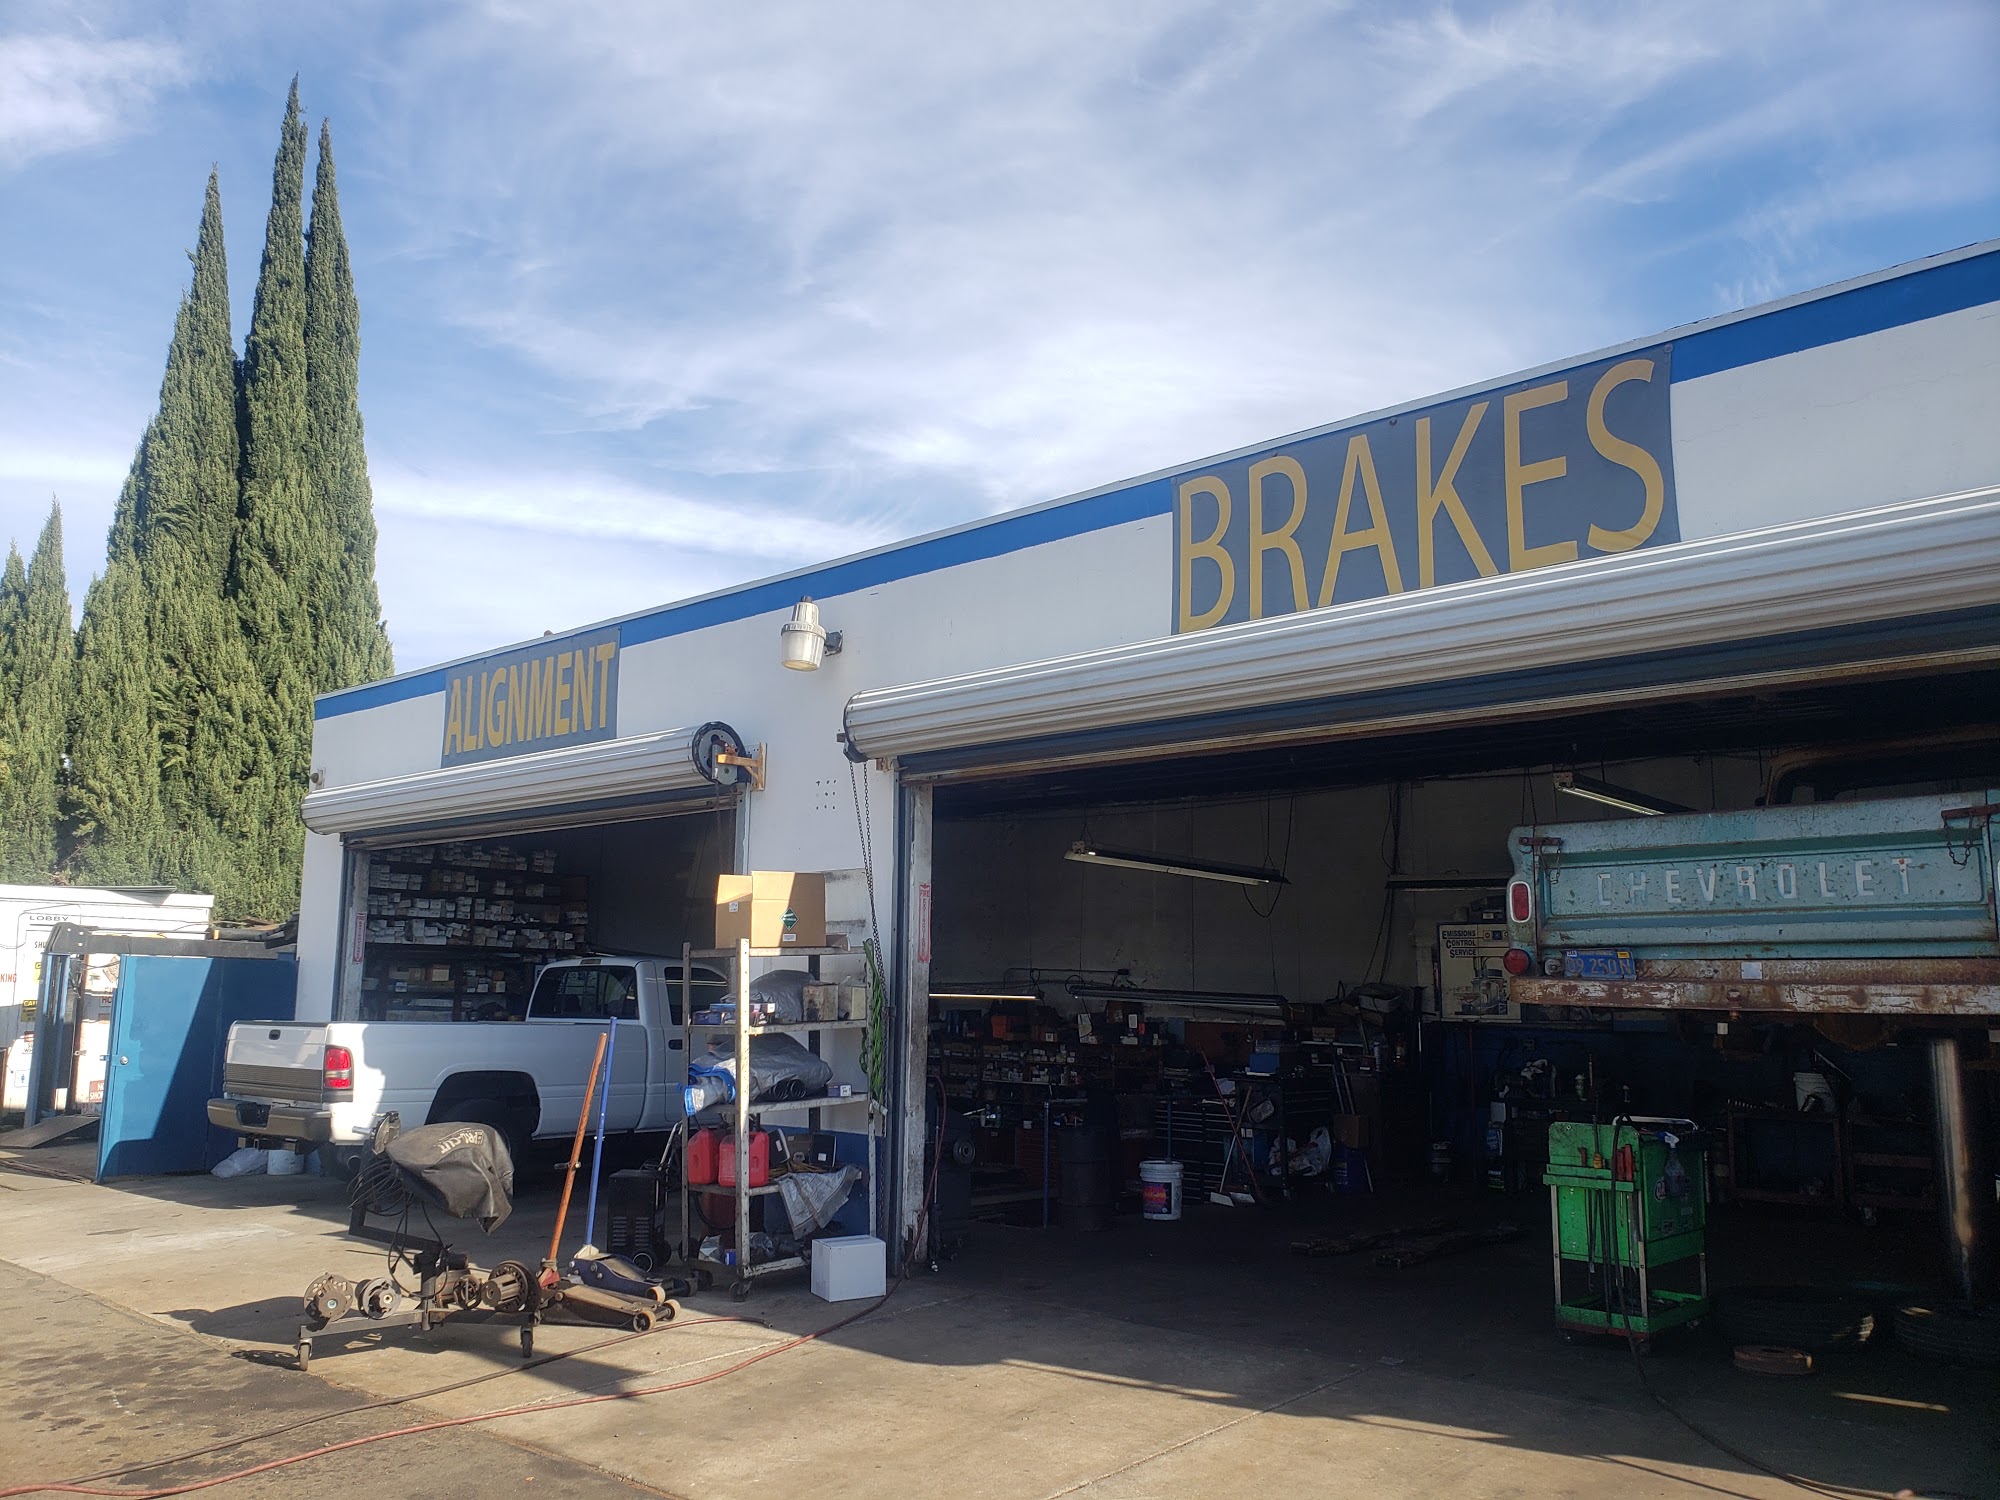 Miller's Wheel Alignment and Brake Service